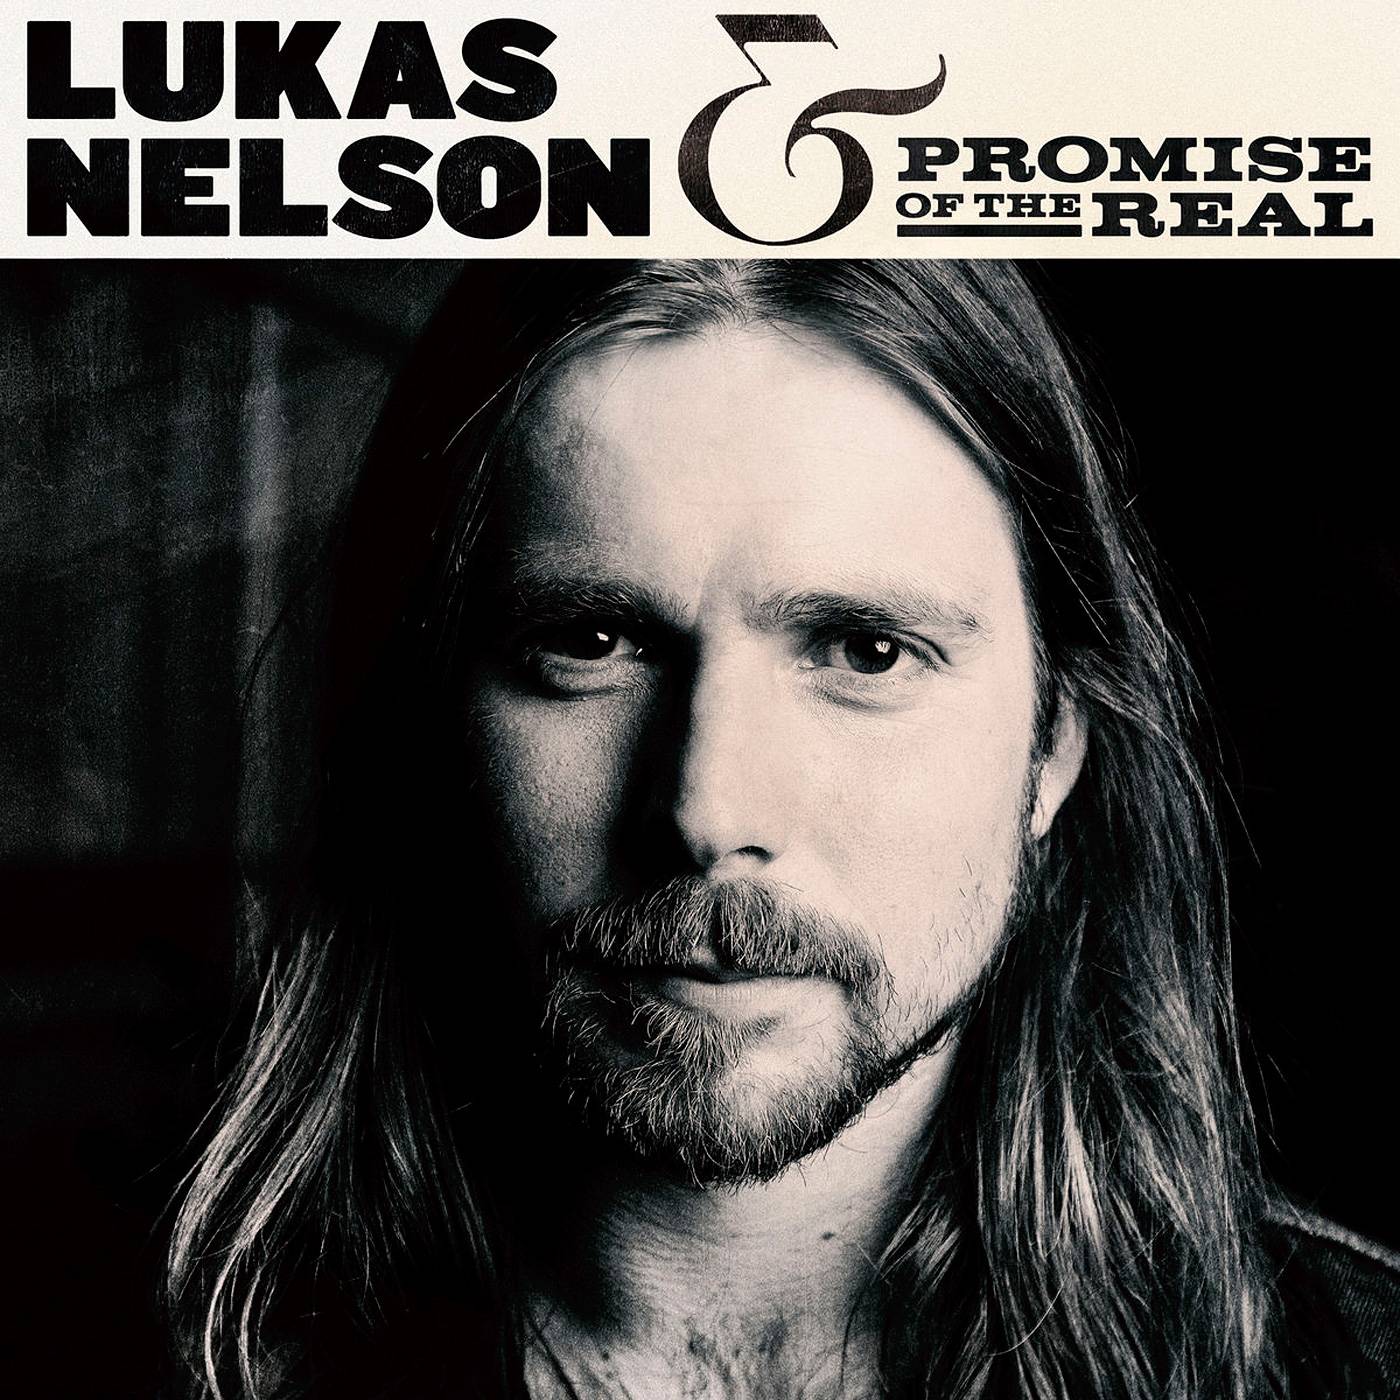 Lukas Nelson & Promise Of The Real – Lukas Nelson & Promise Of The Real (2017) [FLAC 24bit/96kHz]